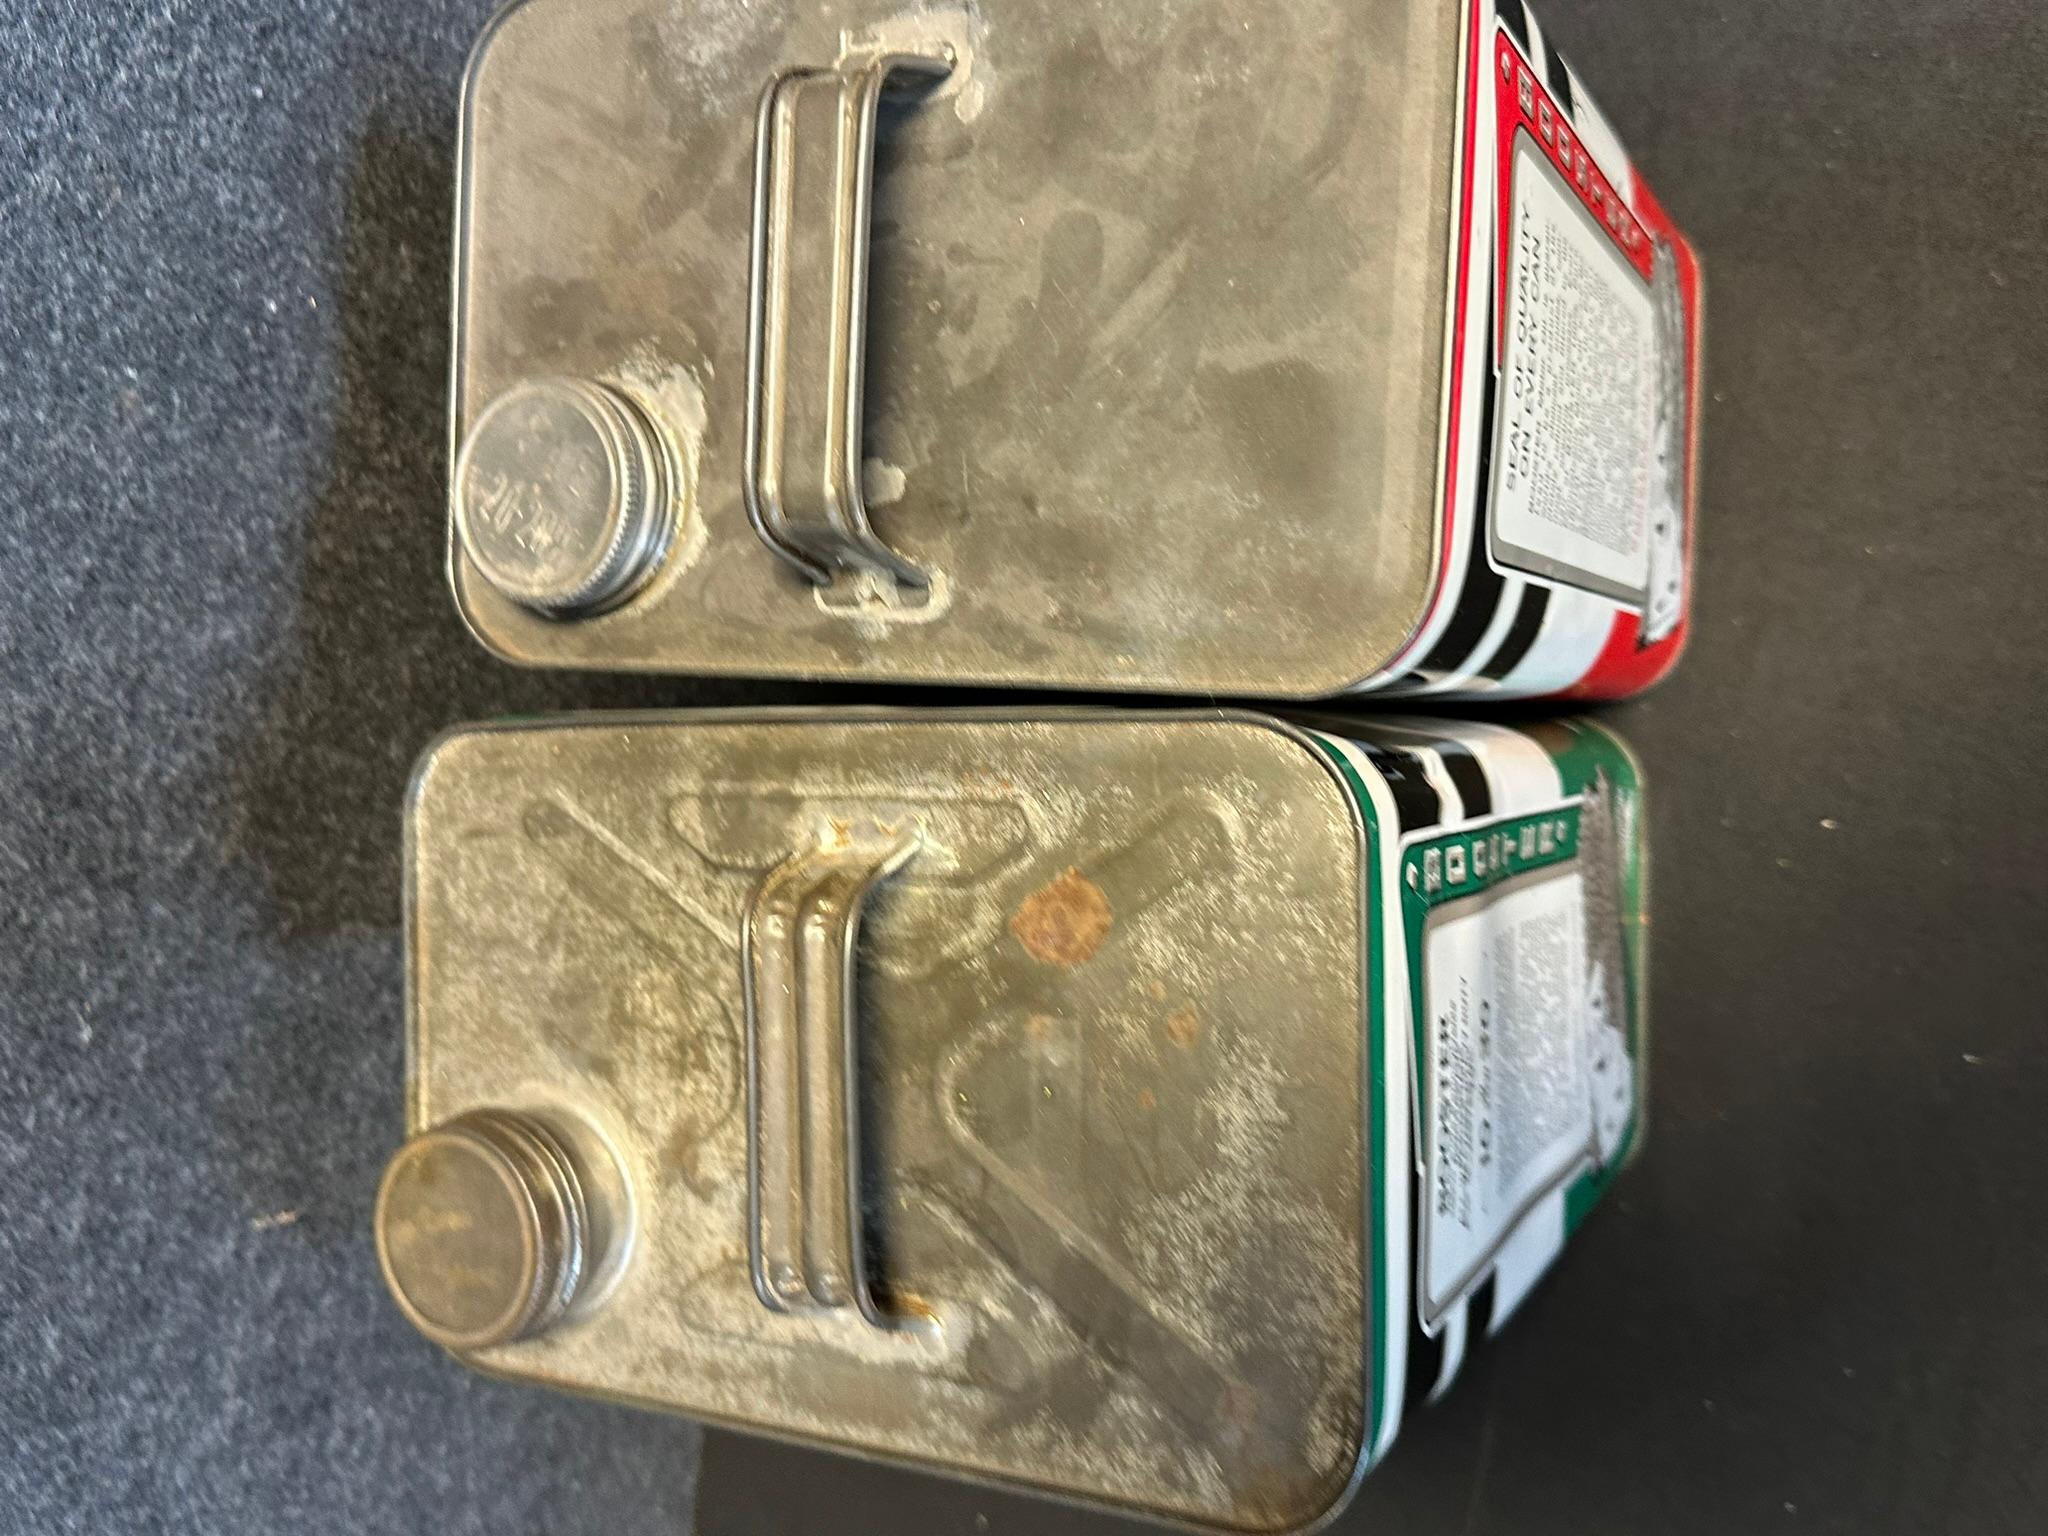 Pair Red & Green Booster Motor Oil Pennsylvania 2 Gallon Cans EX Cond